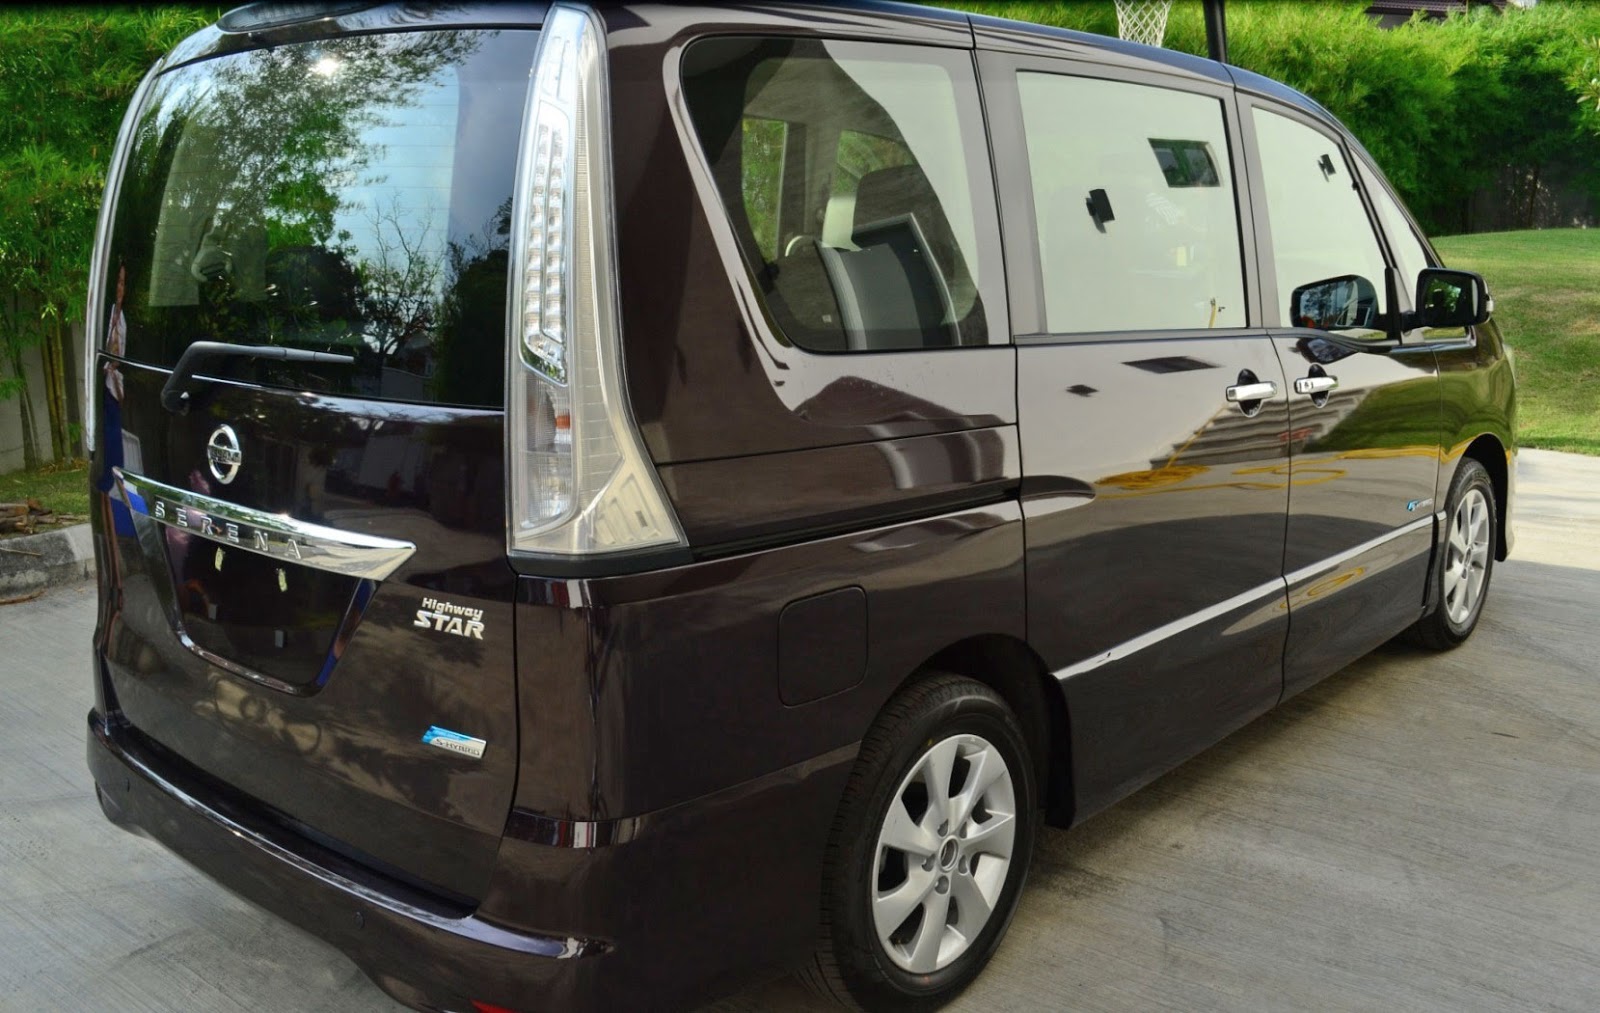 ASIAN AUTO DIGEST Nissan Serena S Hybrid Malaysia Debut